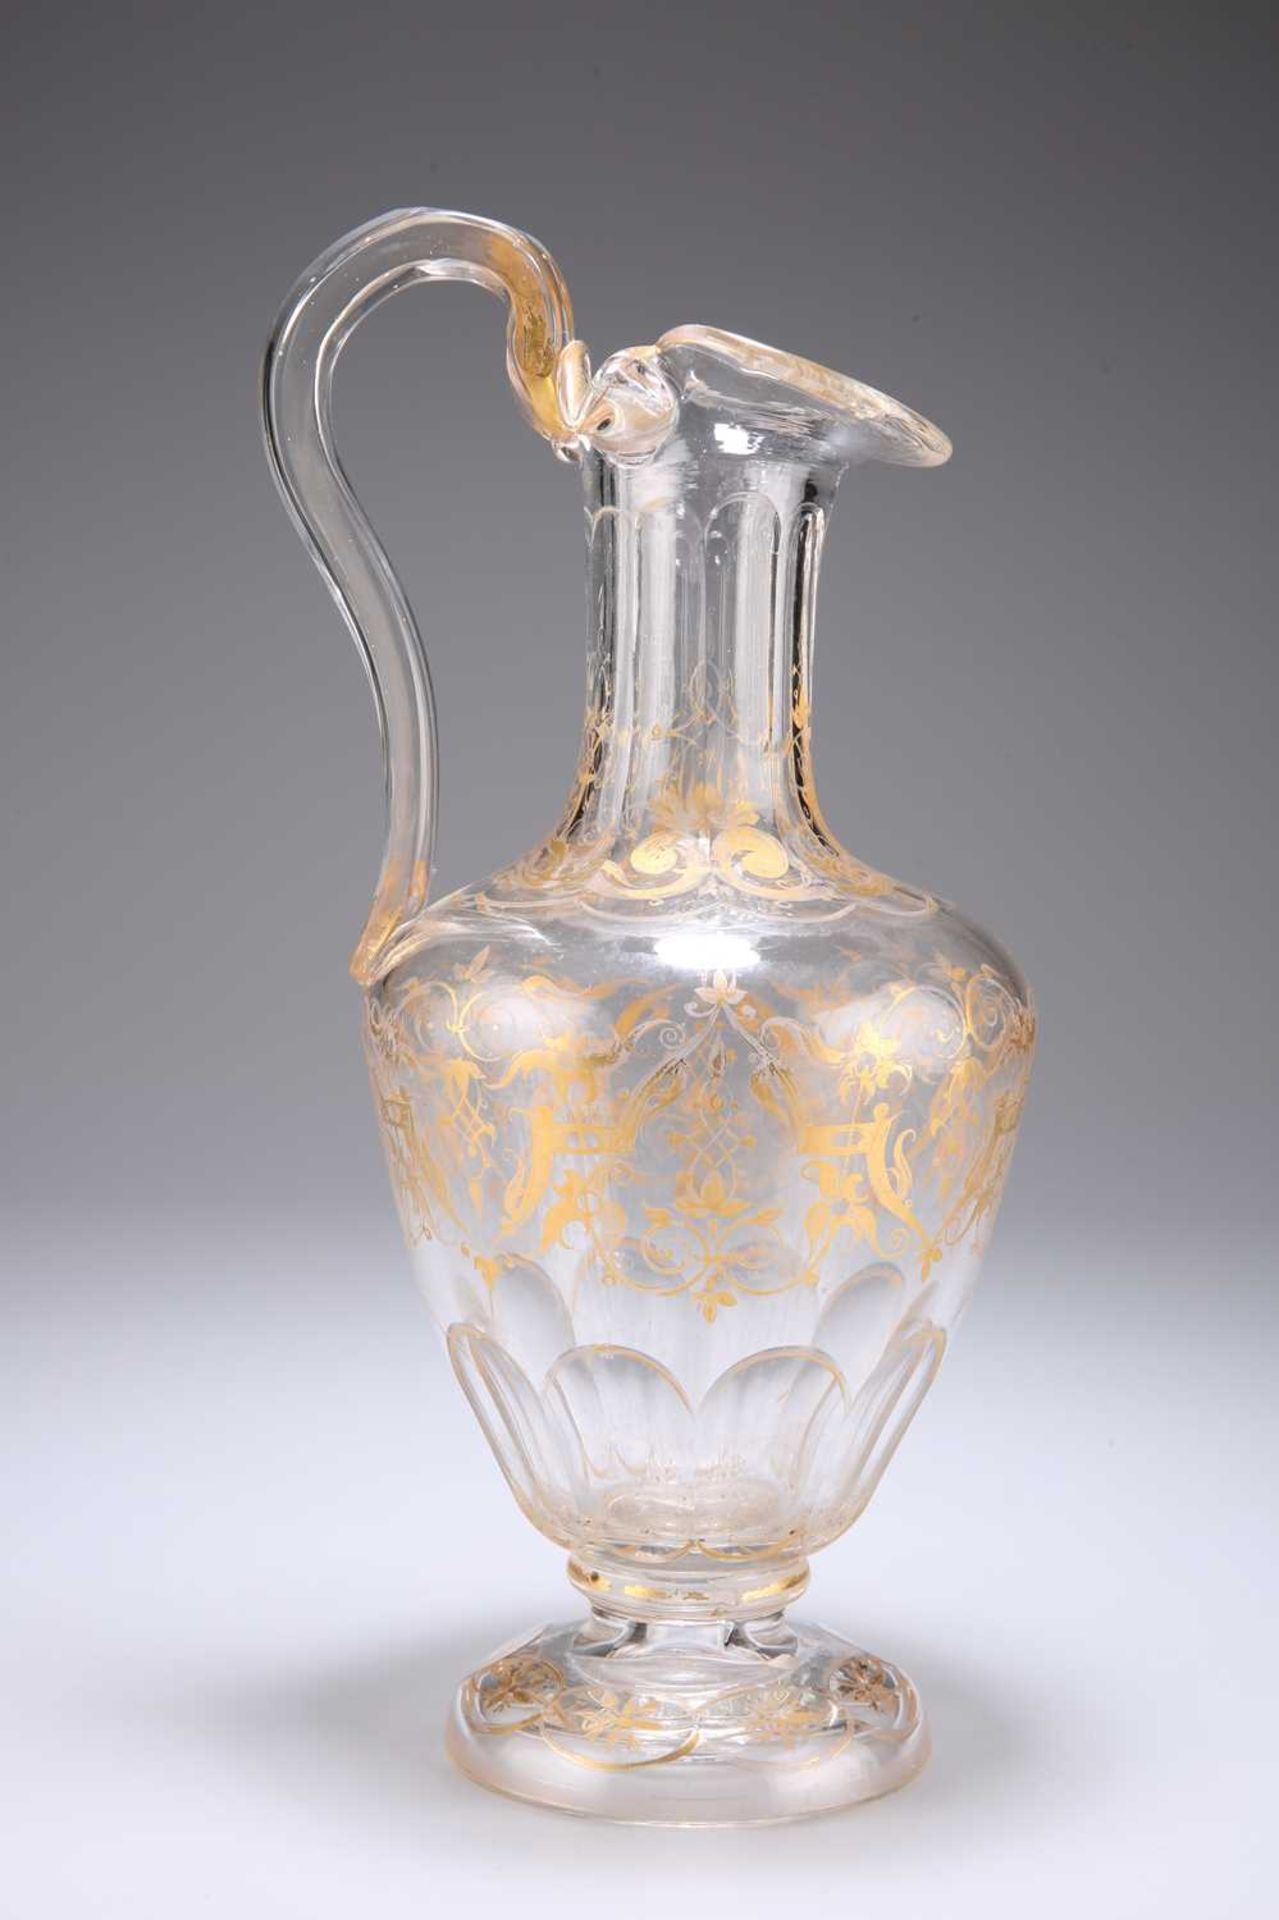 A LARGE GILDED GLASS EWER, MID-19TH CENTURY - Image 3 of 3